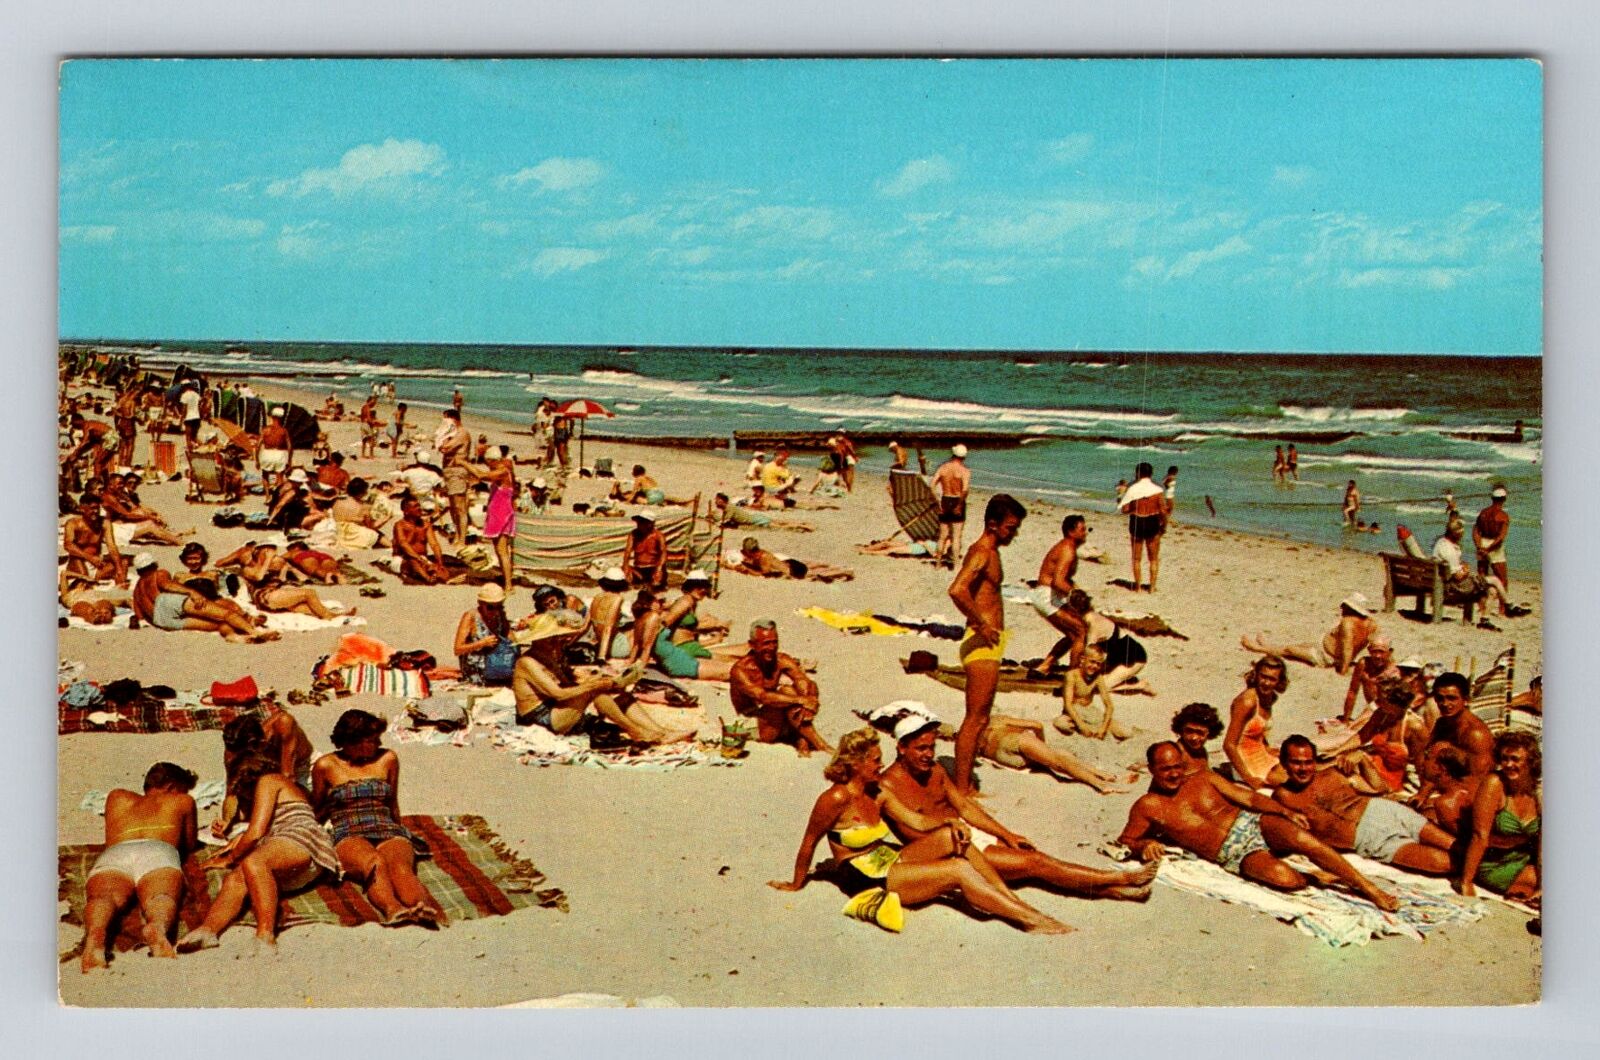 NY-New York, Scenic Crowd Laying In The Sand, Antique, Vintage Souvenir Postcard